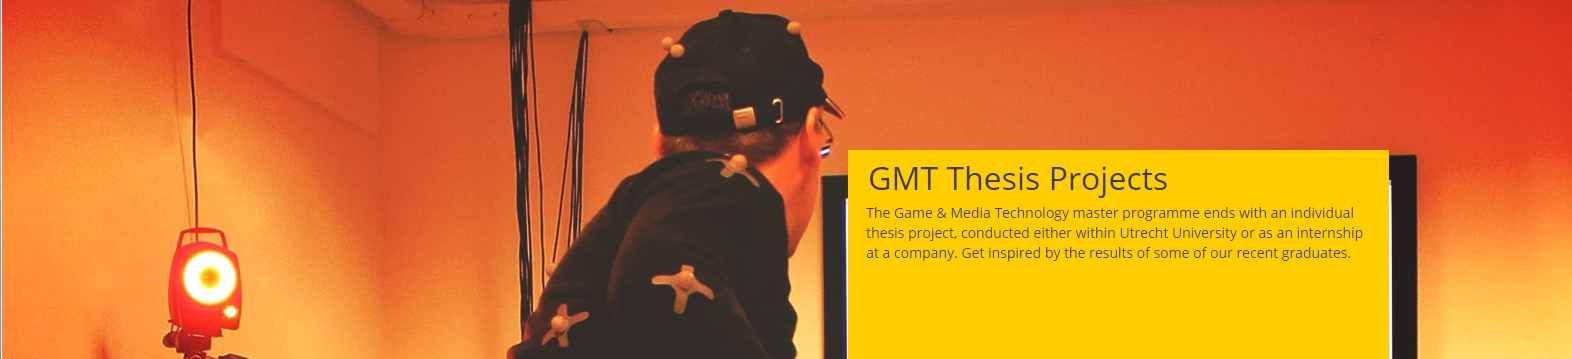 The GMT thesis projects website allows students to dissiminate their work to a broad audience.